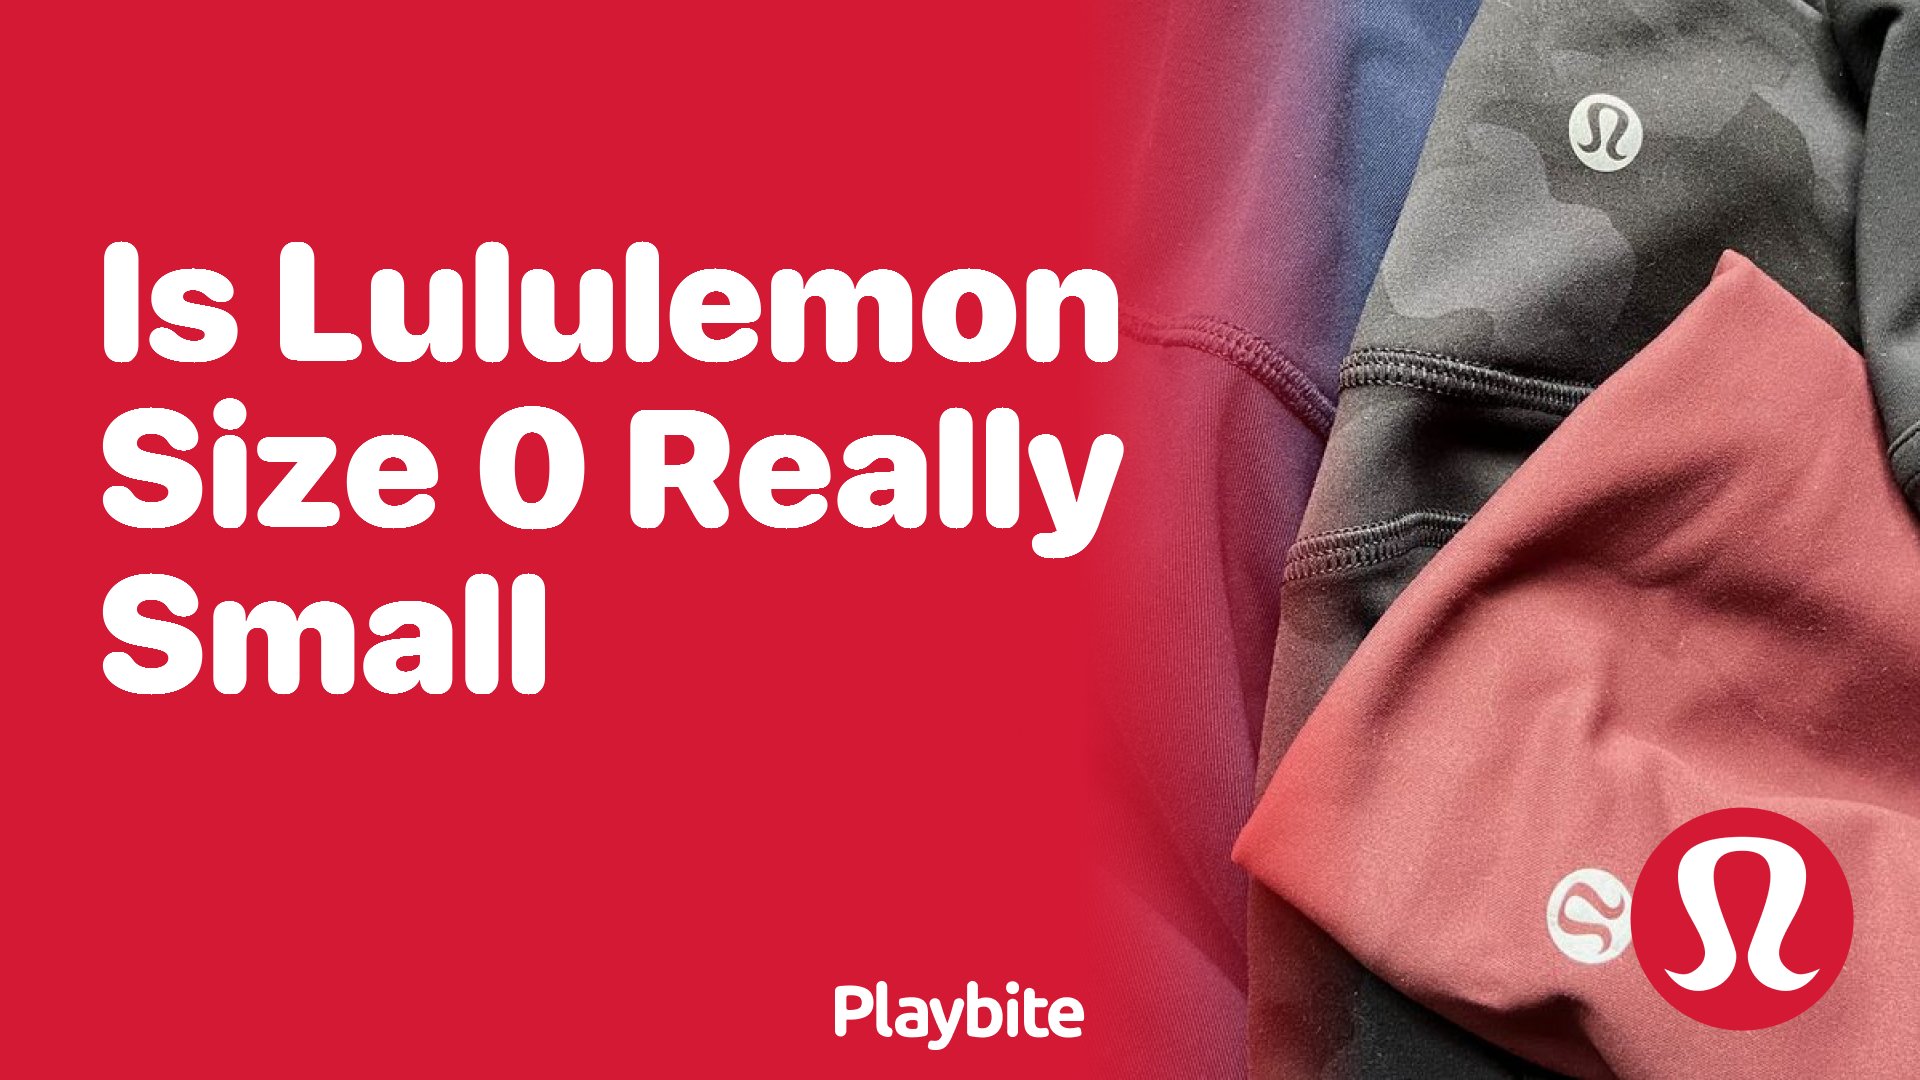 Is Lululemon Size 0 Really Small? - Playbite